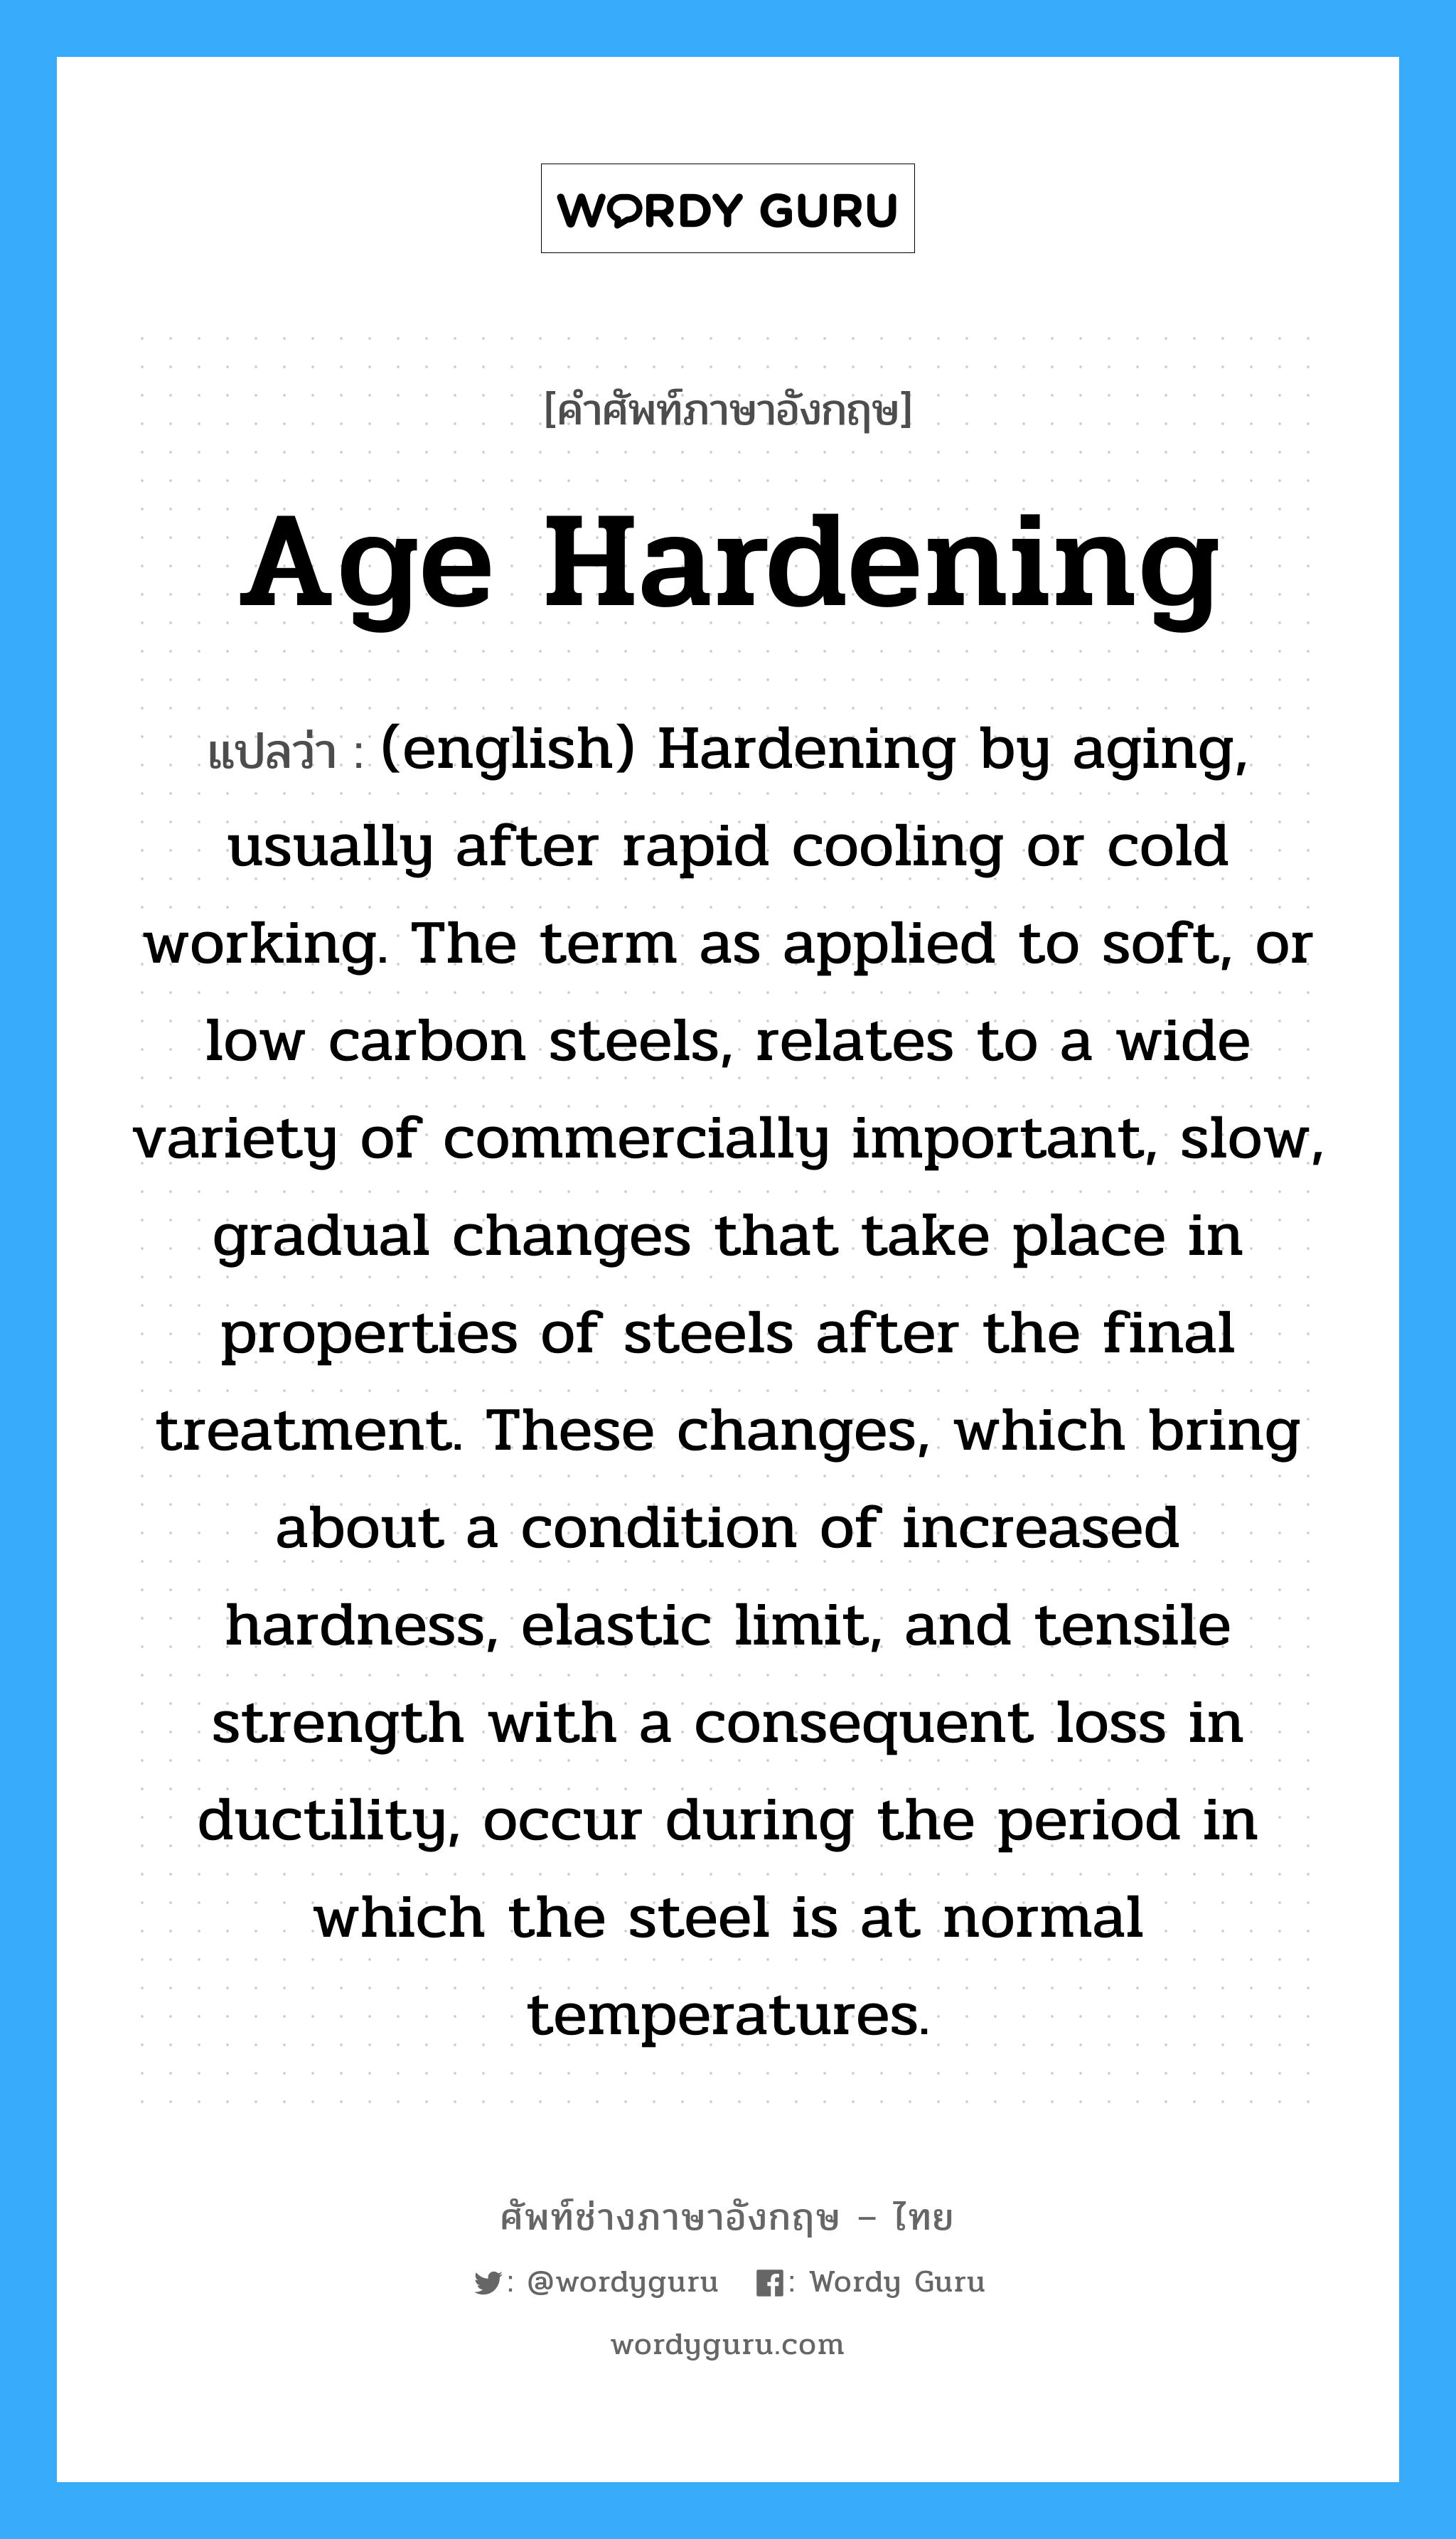 Age Hardening แปลว่า?, คำศัพท์ช่างภาษาอังกฤษ - ไทย Age Hardening คำศัพท์ภาษาอังกฤษ Age Hardening แปลว่า (english) Hardening by aging, usually after rapid cooling or cold working. The term as applied to soft, or low carbon steels, relates to a wide variety of commercially important, slow, gradual changes that take place in properties of steels after the final treatment. These changes, which bring about a condition of increased hardness, elastic limit, and tensile strength with a consequent loss in ductility, occur during the period in which the steel is at normal temperatures.